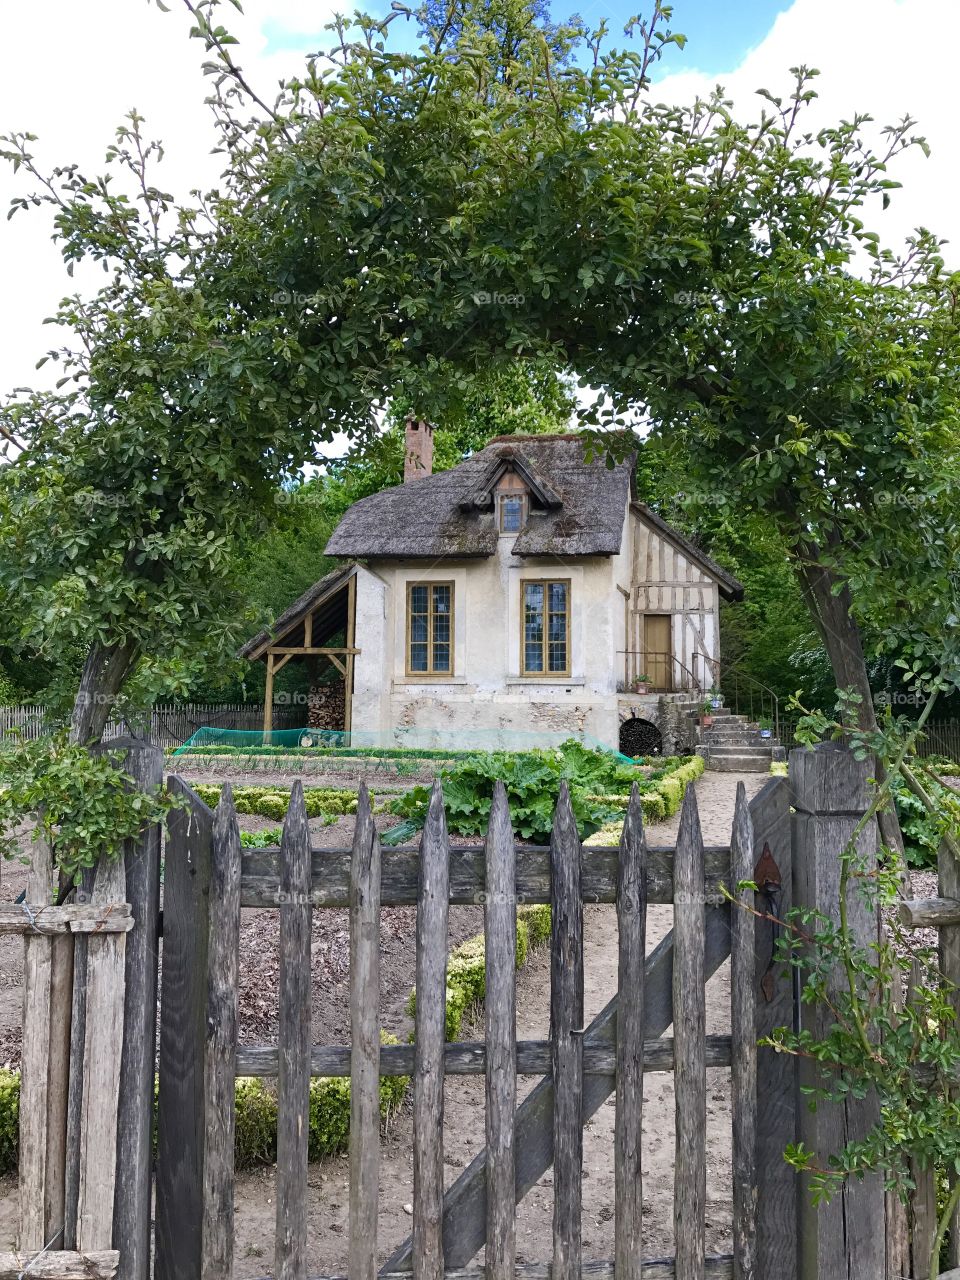 House, Architecture, Building, Wood, Old